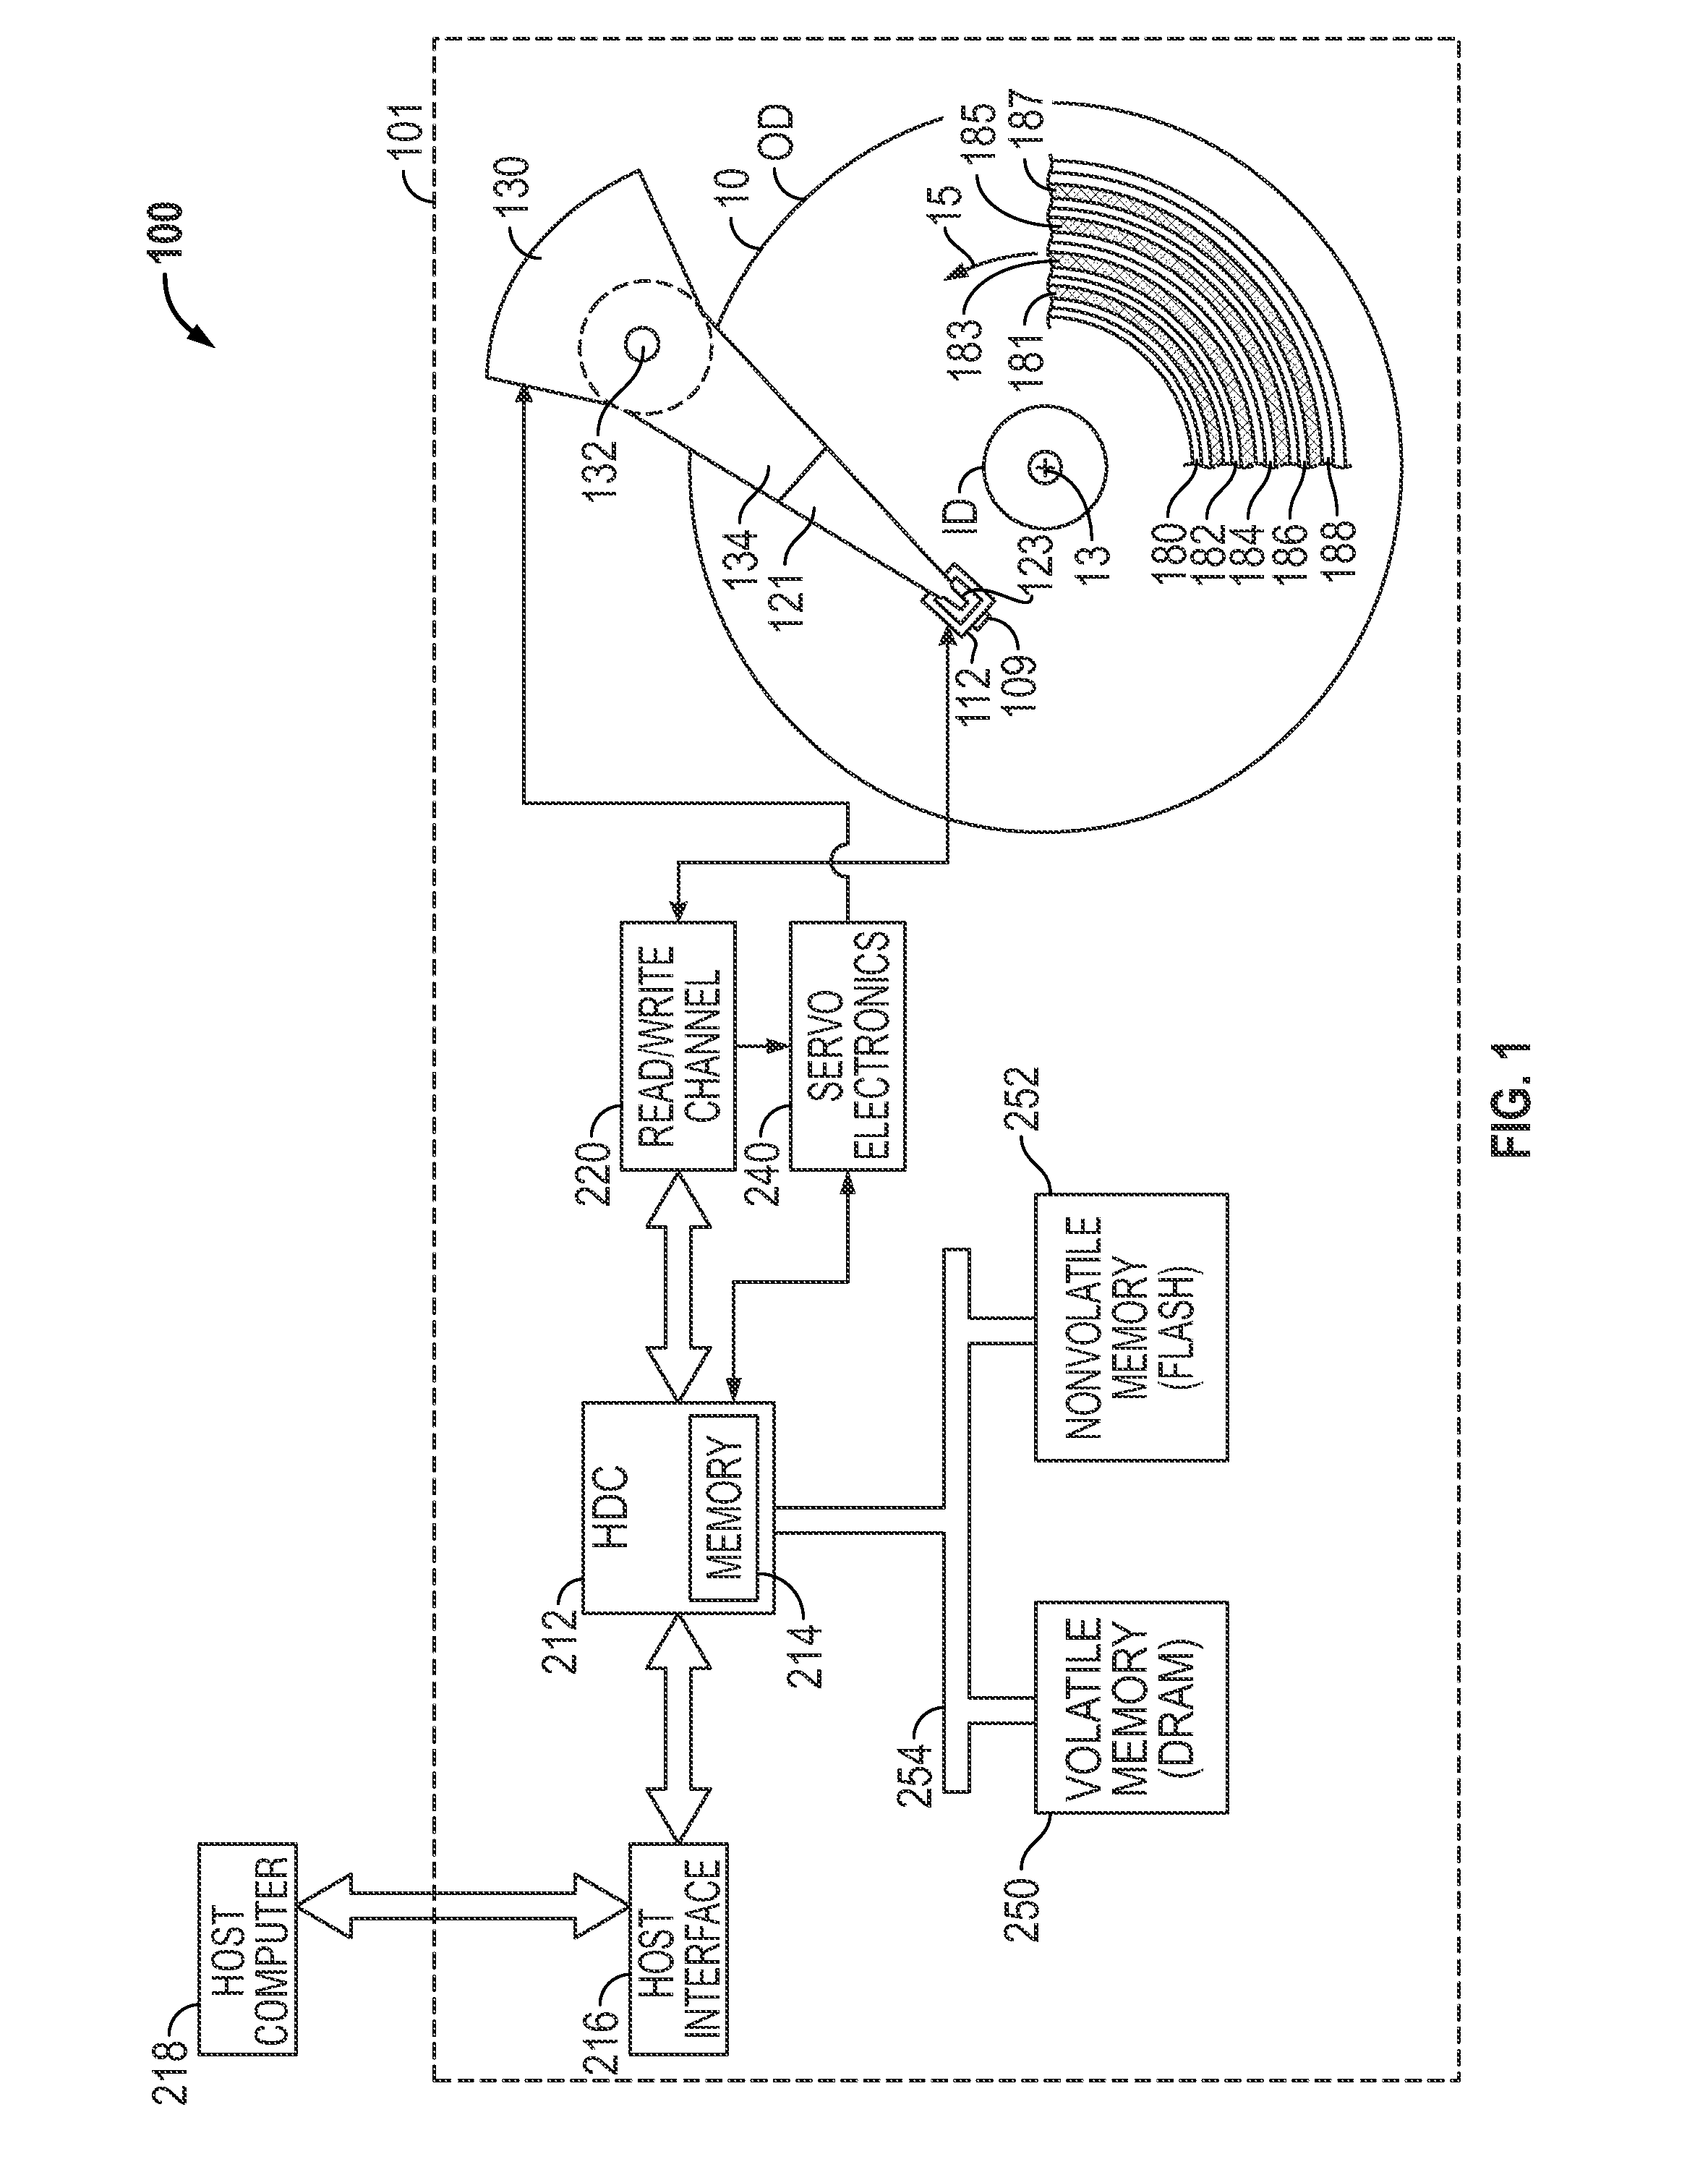 Shingled magnetic recording disk drive with inter-band disk cache and minimization of the effect of far track erasure on adjacent data bands